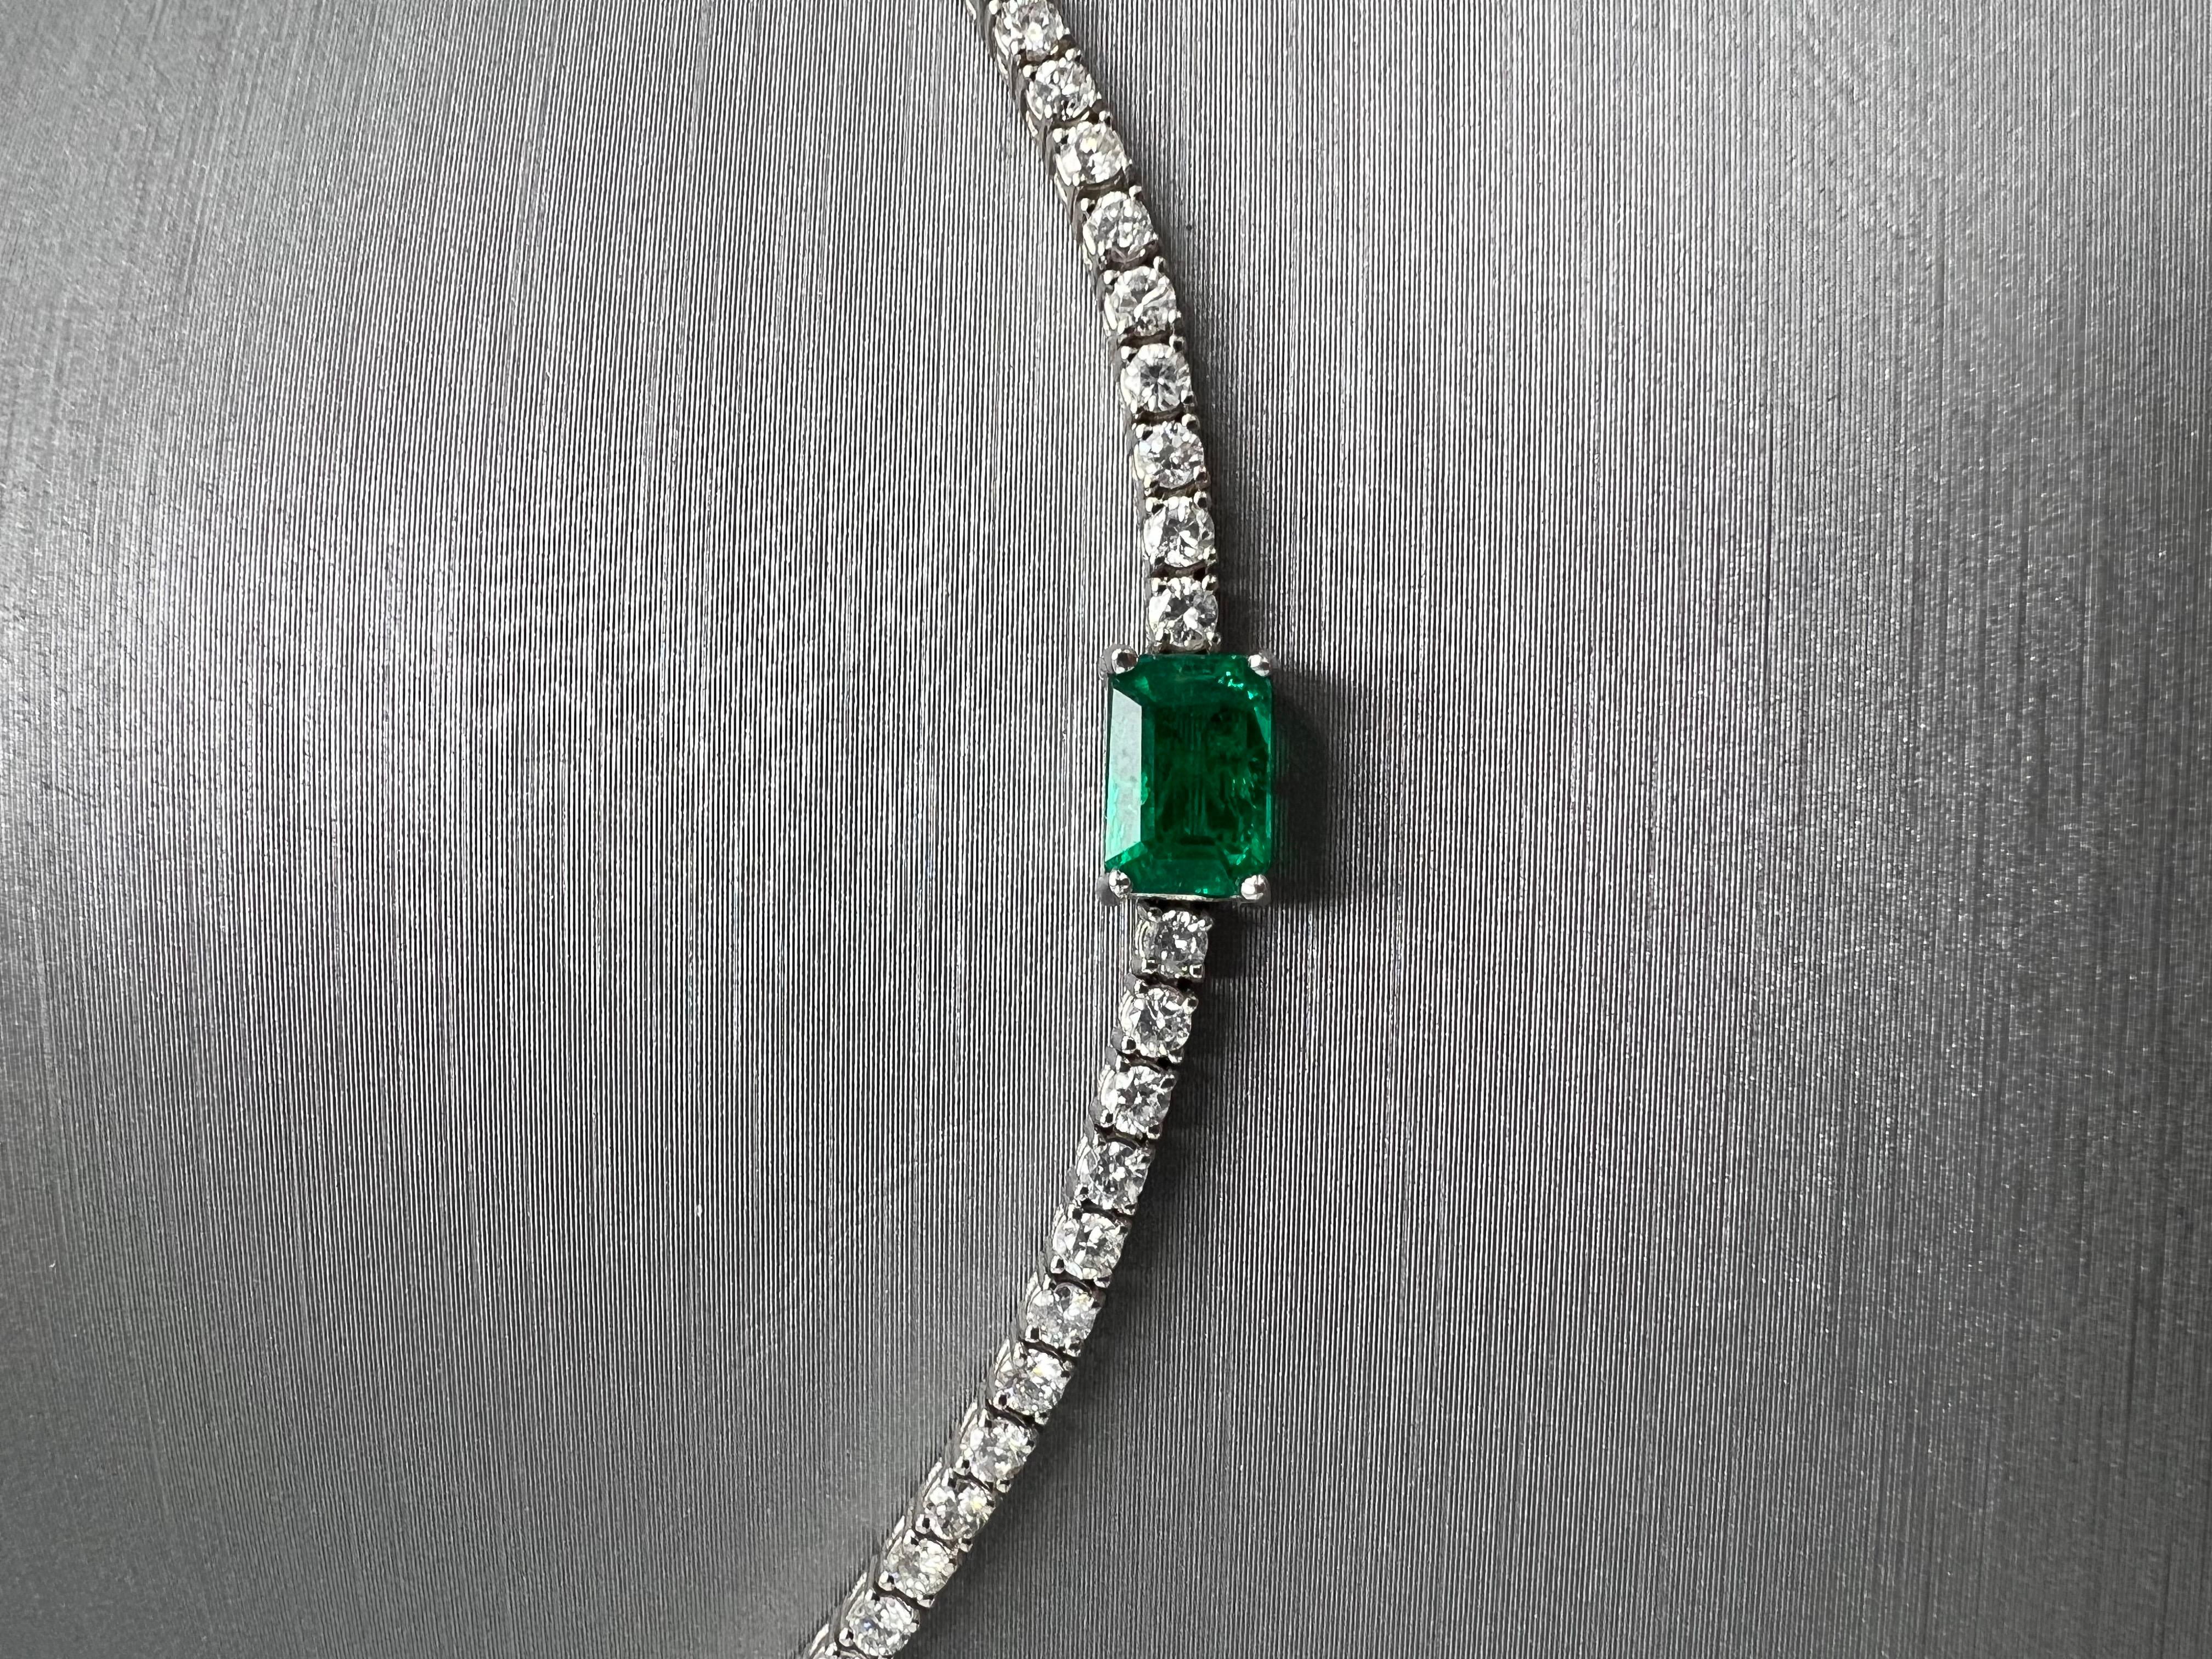 Diamond Choker with a Natural Emerald Gem-stone in 14k White and Natural Diamonds
3.90 Total Carat Weight of Natural Full Brilliant Cut Diamonds
0.91 Total Carat Weight of a Natural Green Emerald
14k White Gold
Adjustable Size: from 13 inches to 17